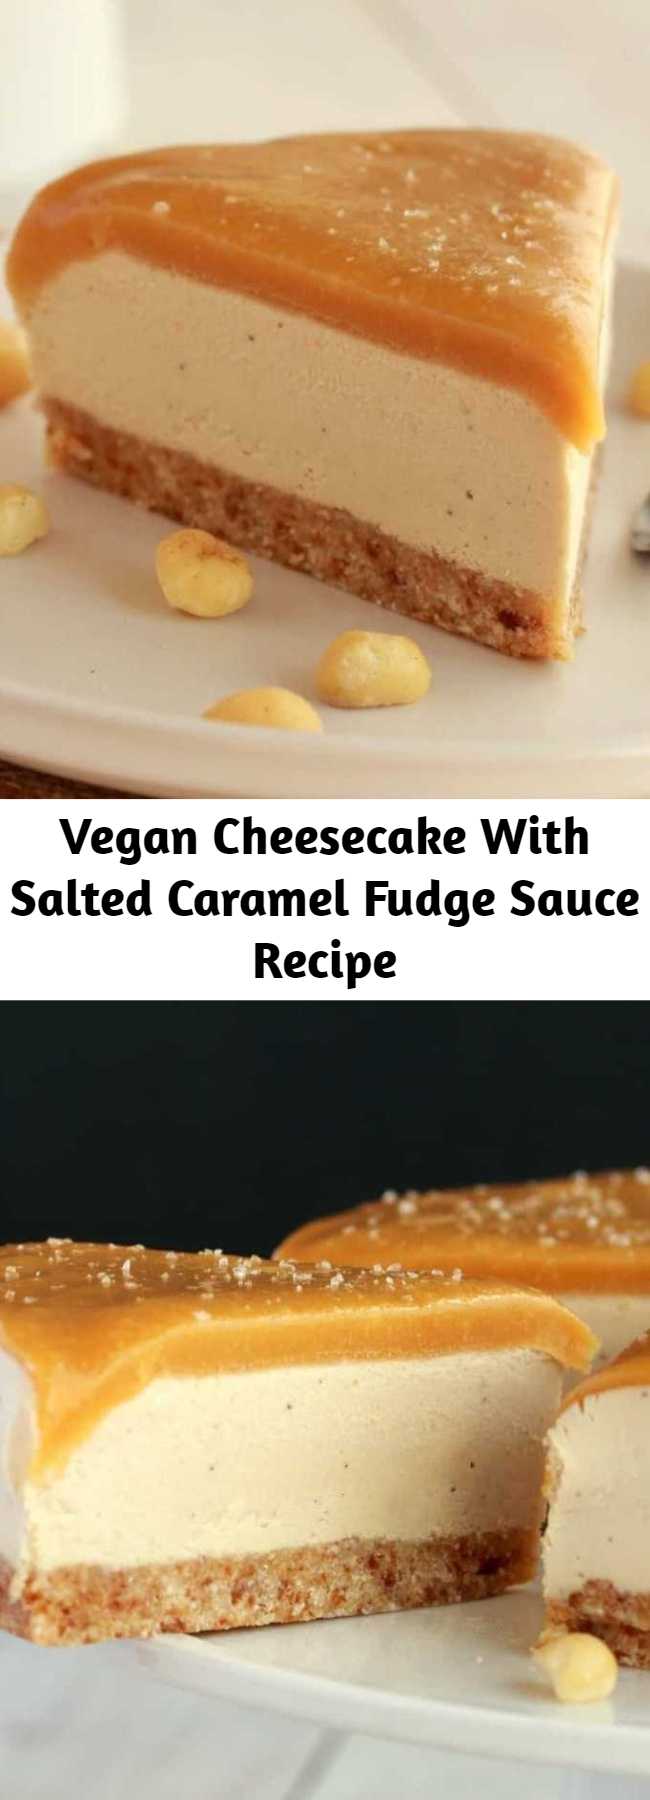 Vegan Cheesecake With Salted Caramel Fudge Sauce Recipe - Vegan cheesecake with a salted caramel fudge sauce topping! This ultra creamy cheesecake is so much like the ‘real thing’ you will not believe and it’s super easy to make too! Raw and Gluten-Free! #vegan #dairyfree